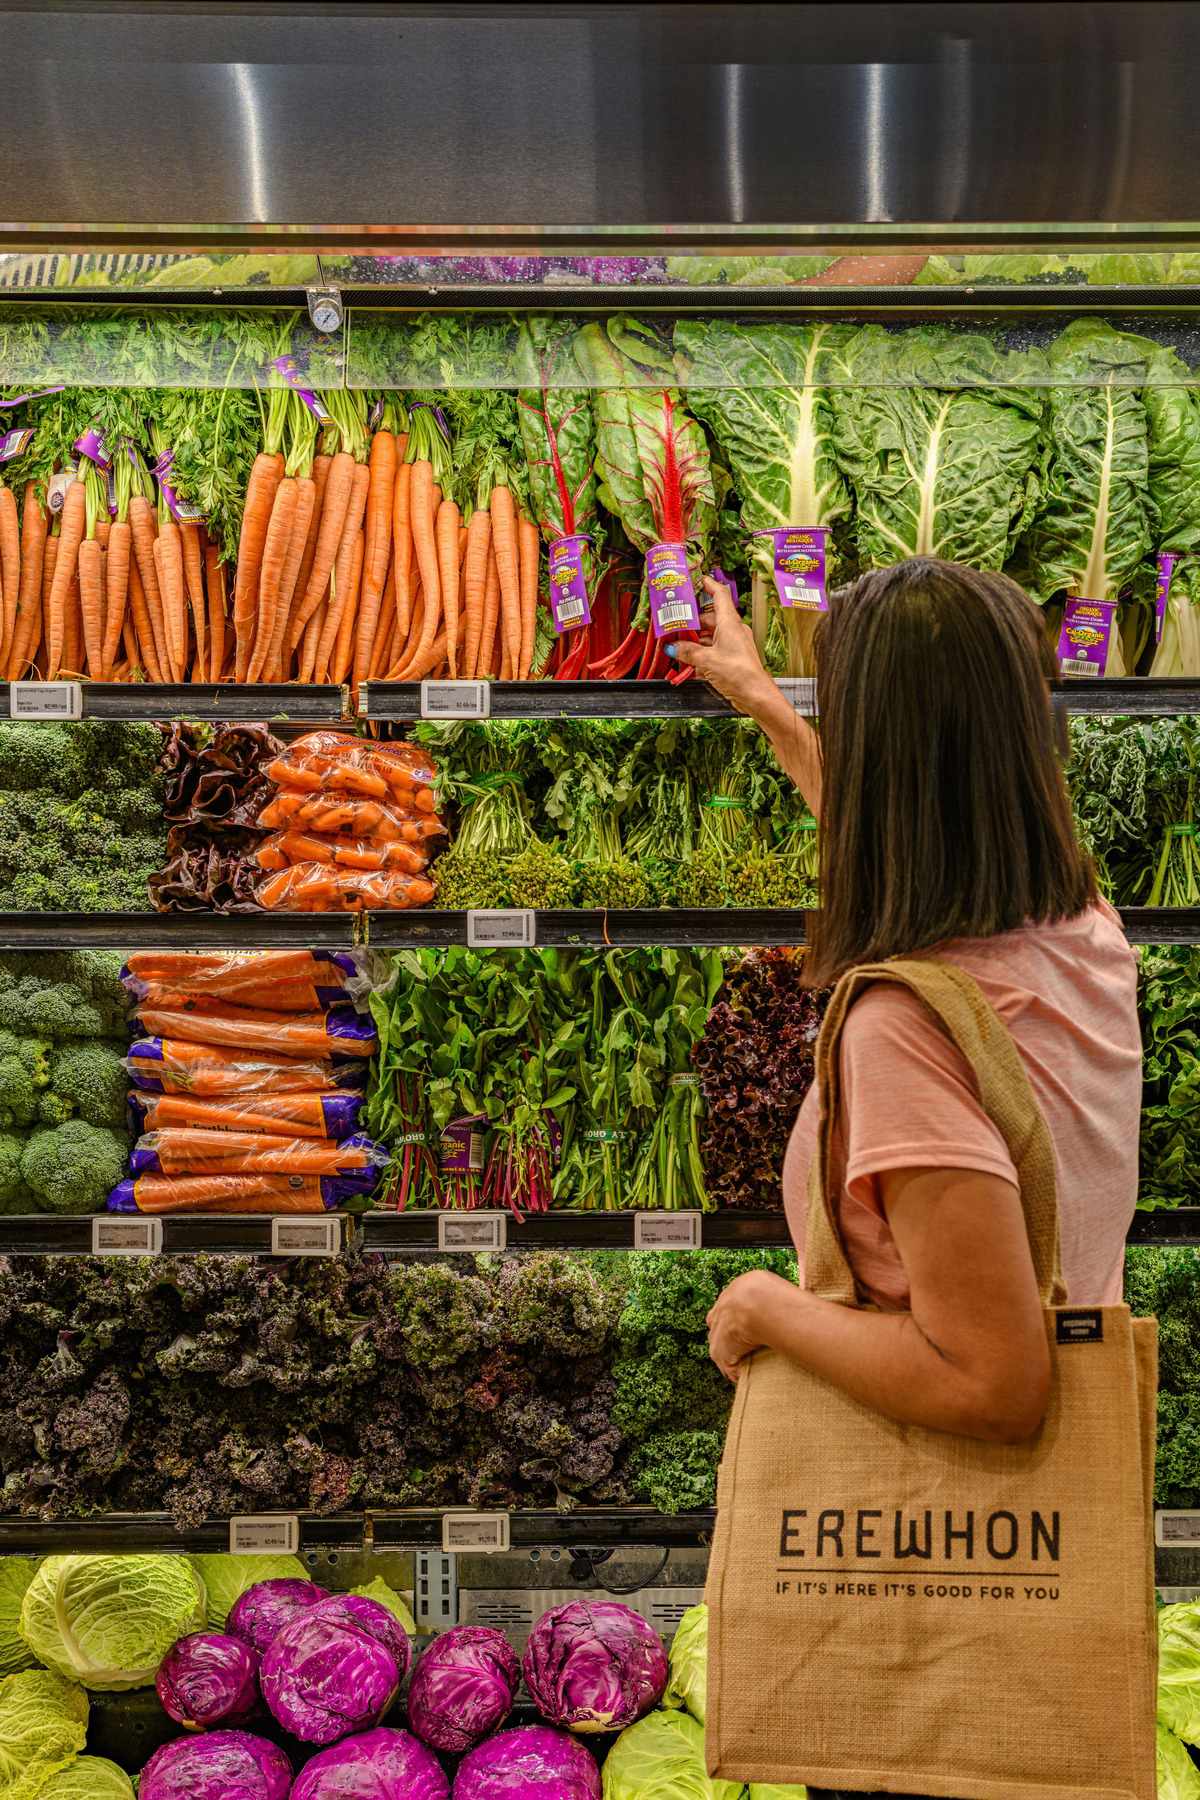 A woman shops at Erewhon Market in California with a tote bag, standing in front of a display of vegetables